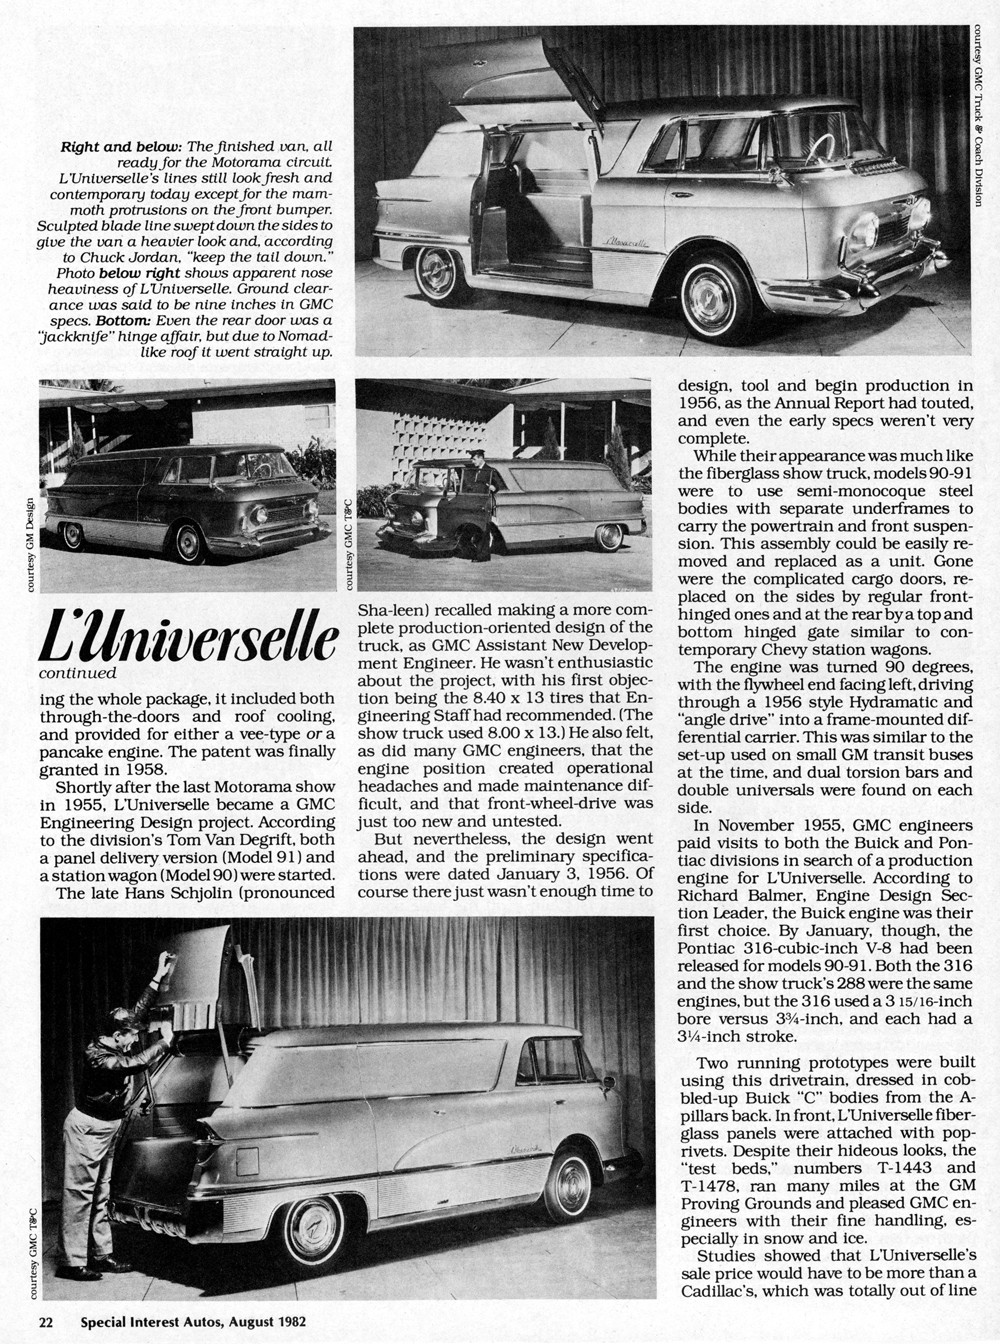 1955 GMC L'Universelle "Concept Truck" SIA_LUniverselle_05_1001